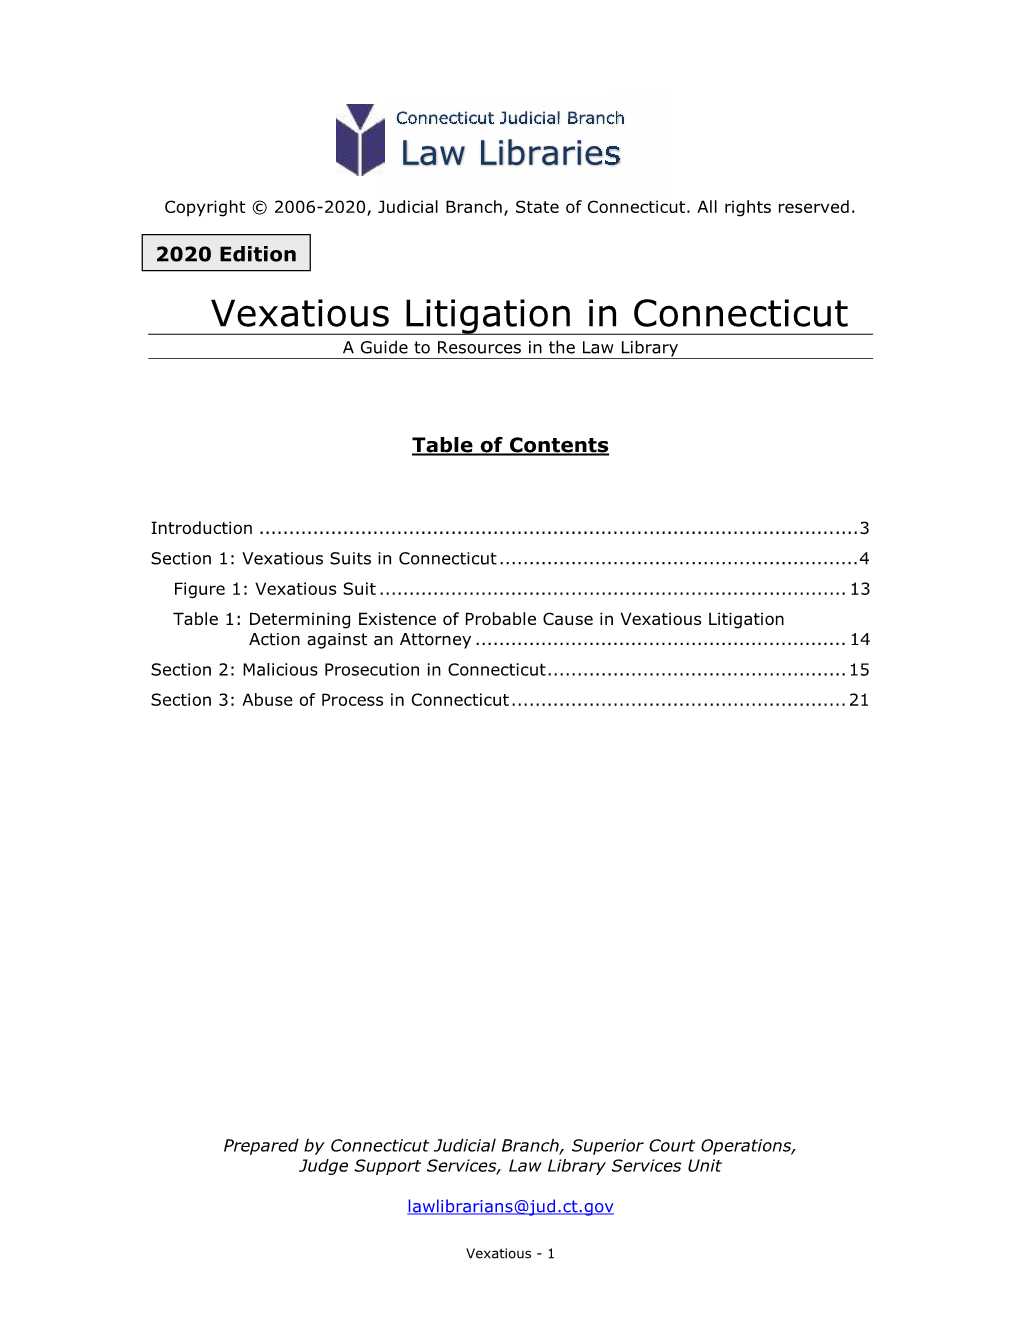 Vexatious Litigation in Connecticut a Guide to Resources in the Law Library